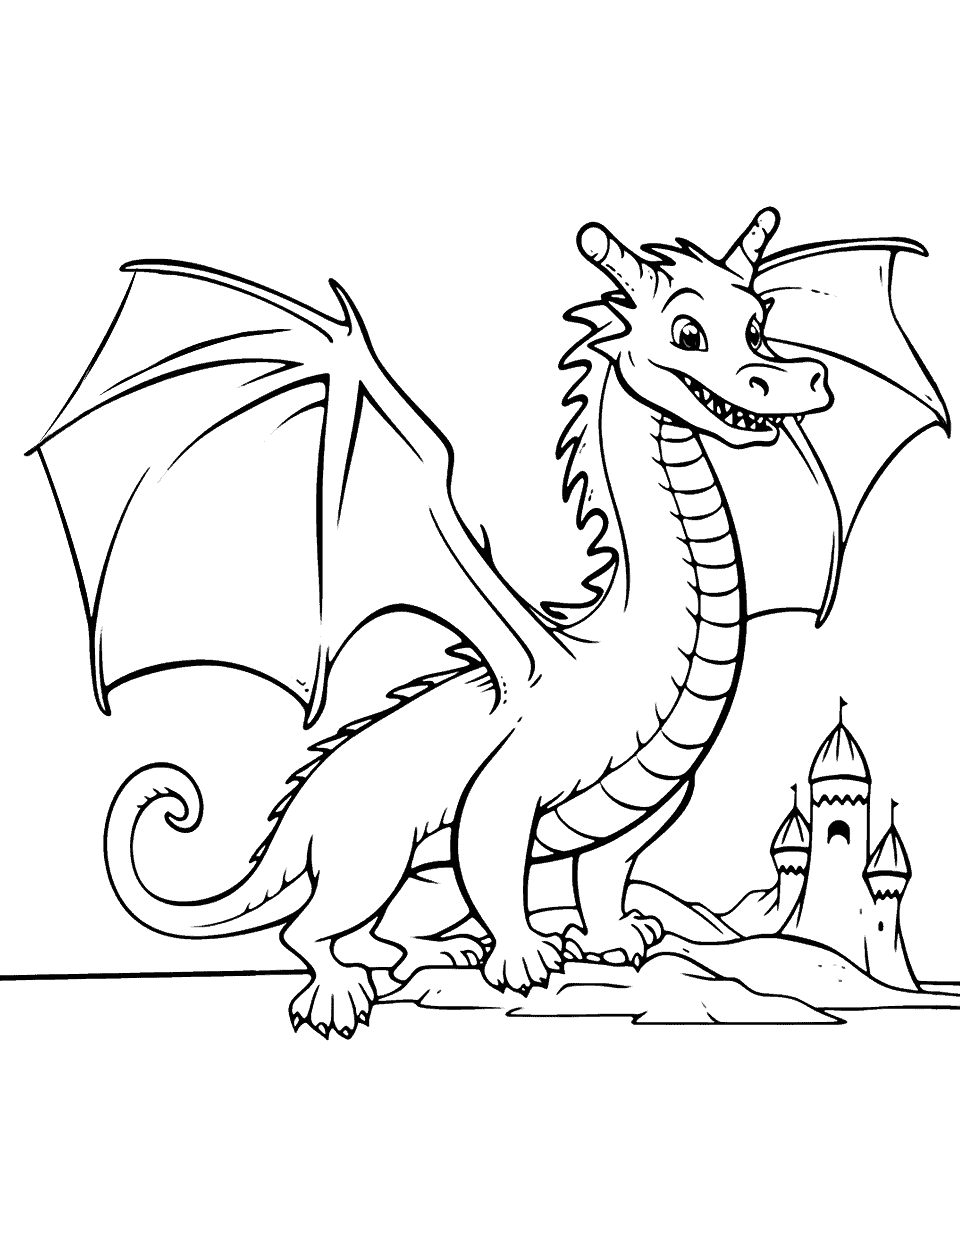 Dragon and Castle Coloring Page - A dragon flying around a grand castle.